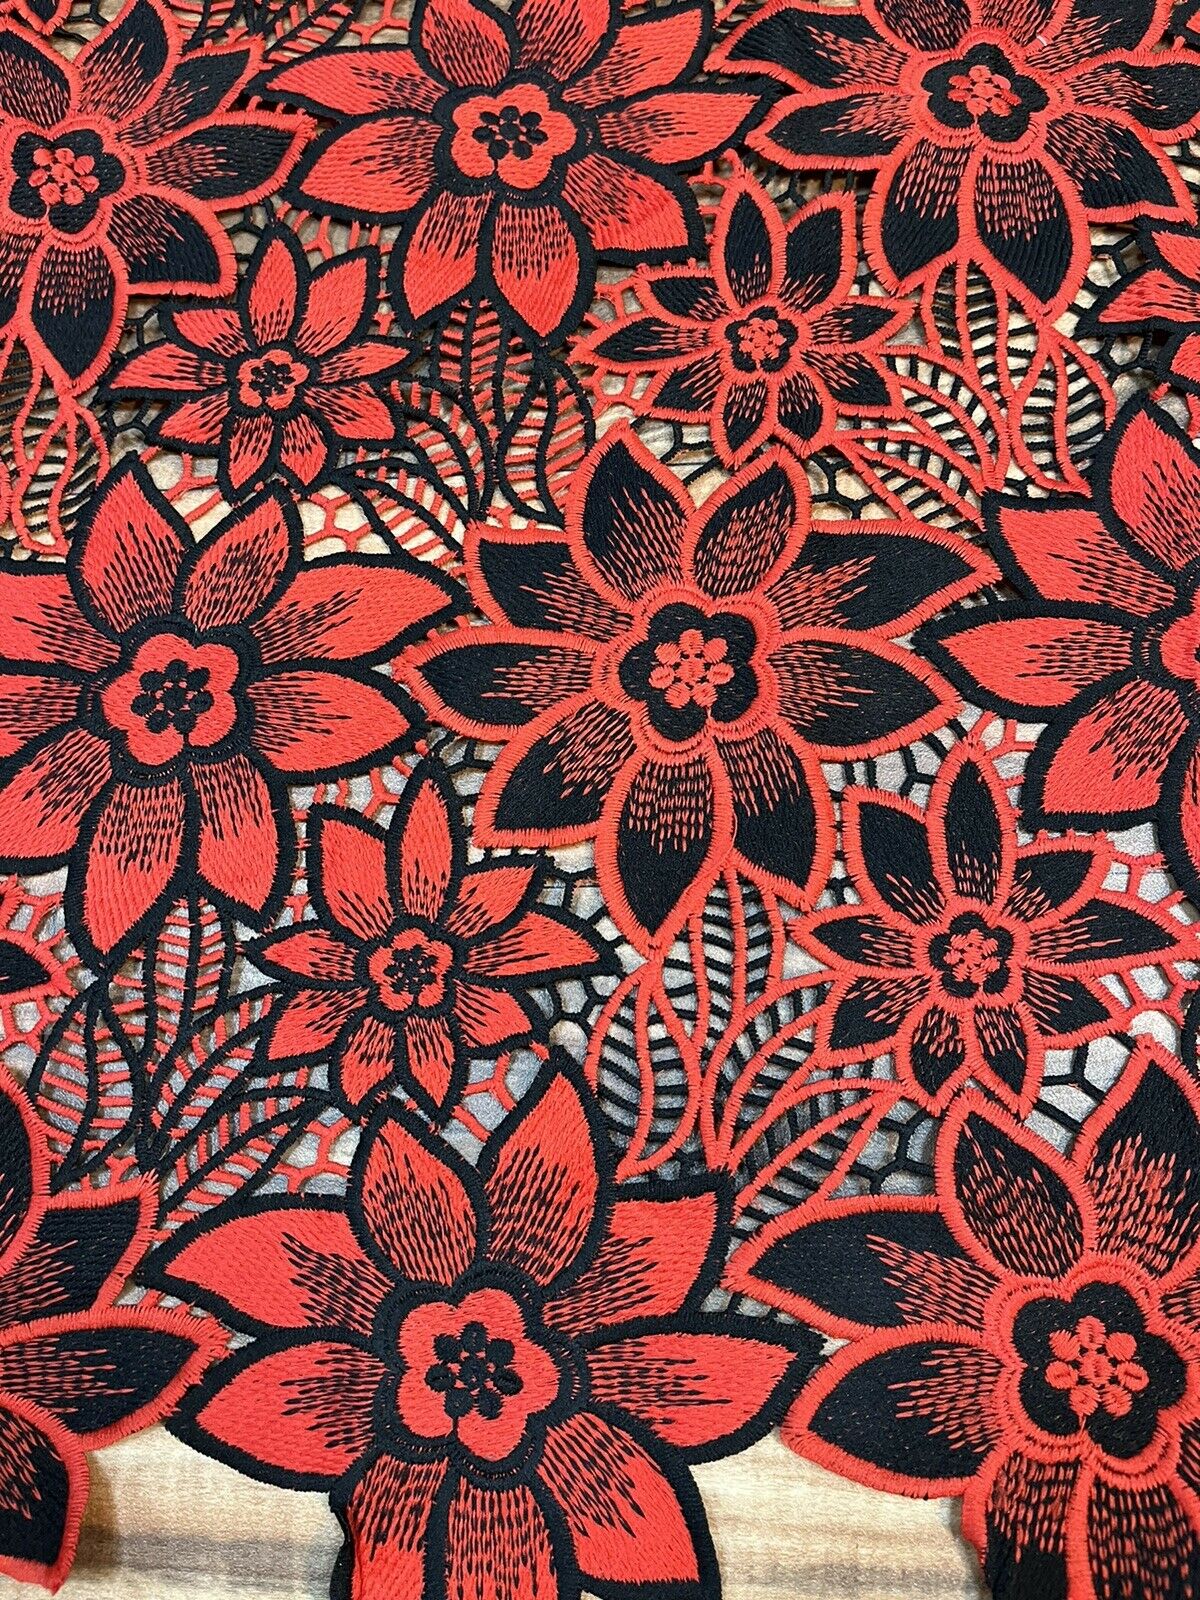 Floral Red and Black Crochet Cotton Lace with Scalloped Edges